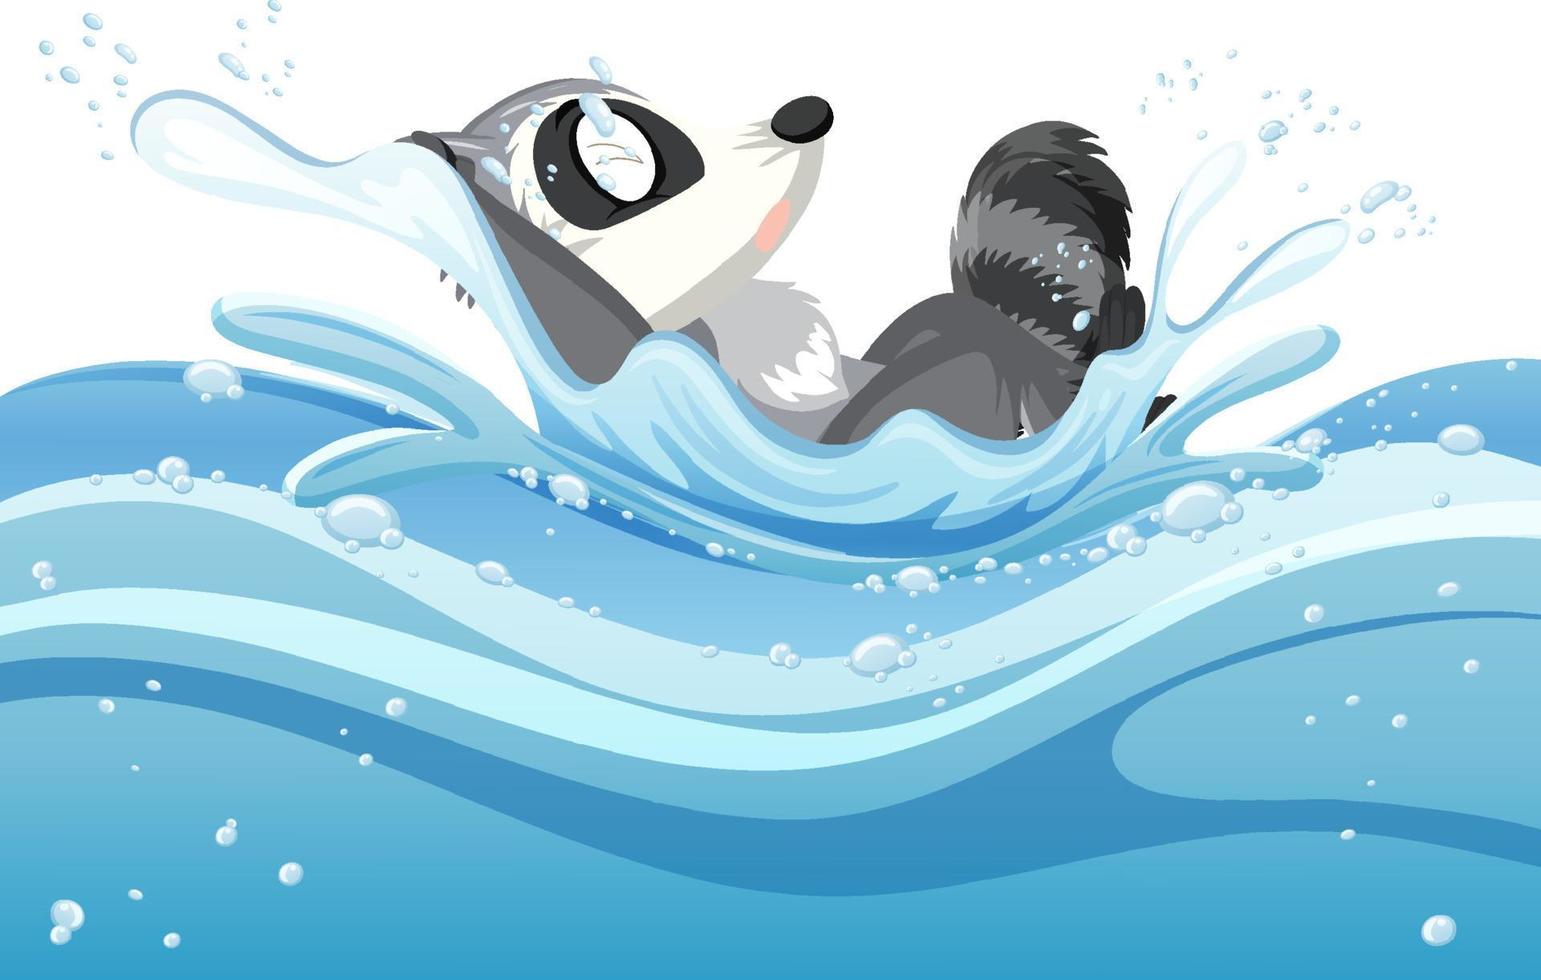 A water splash with raccoon on white background vector